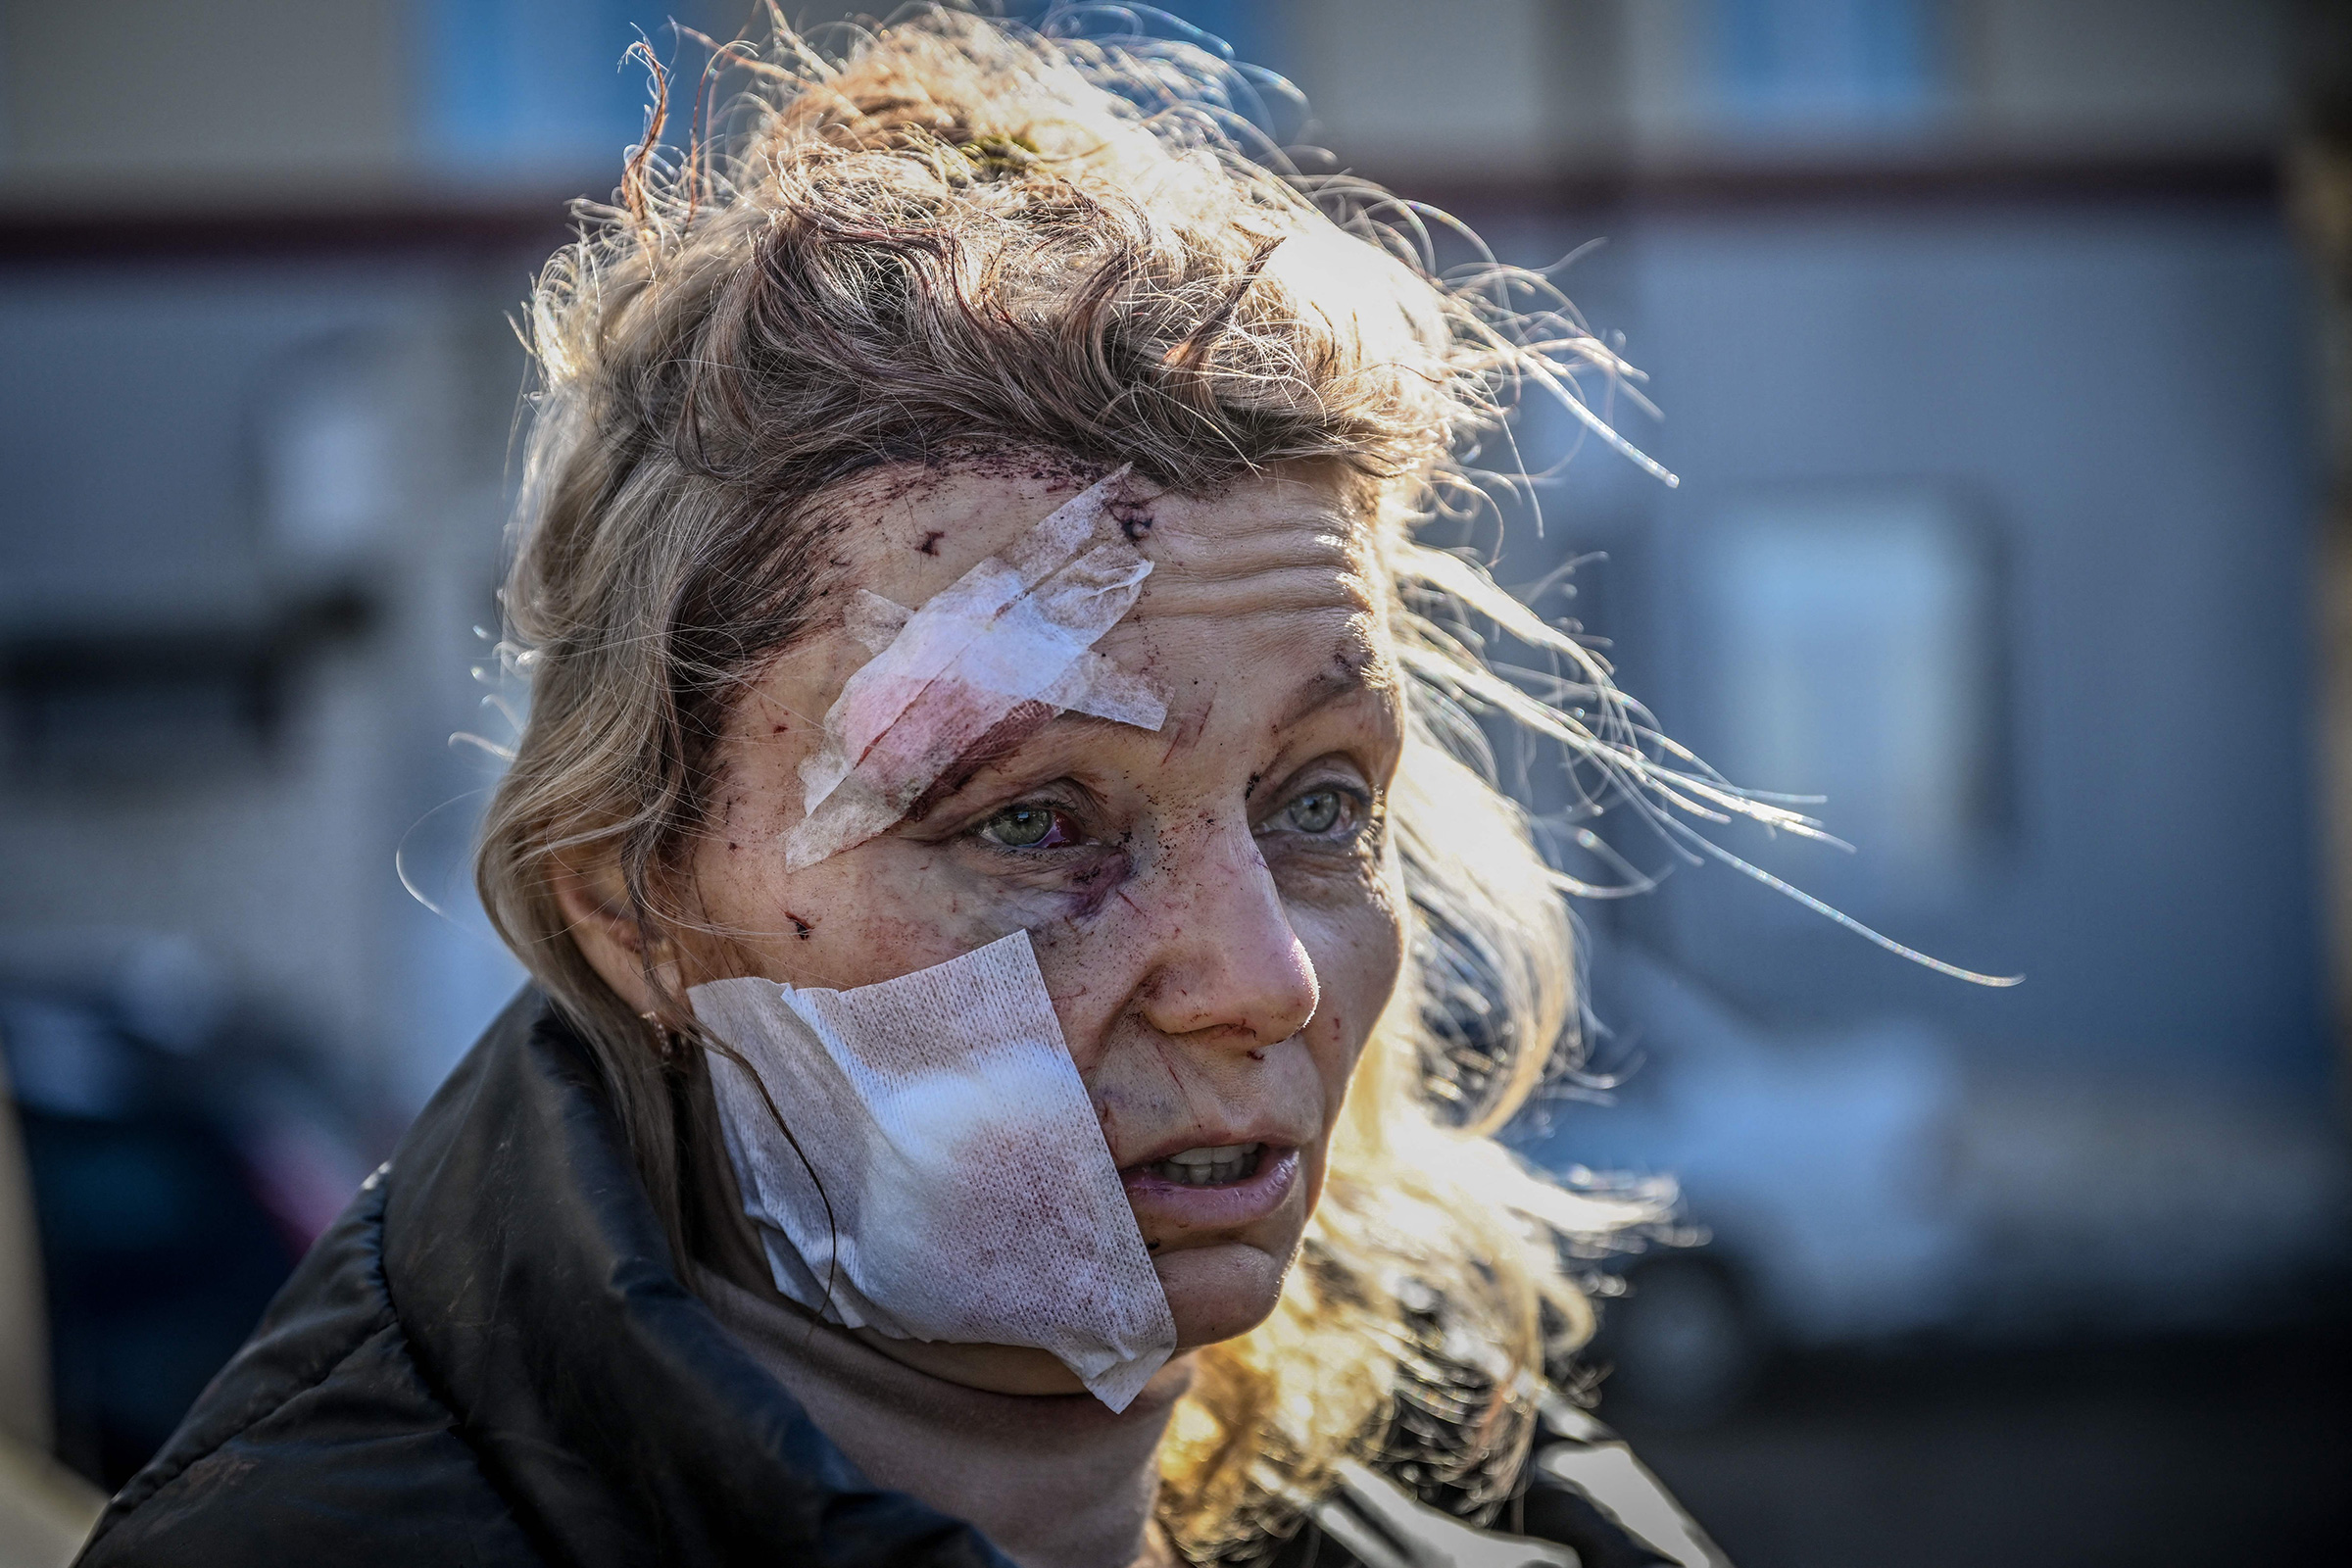 A wounded woman stands outside a hospital after a bombing in Chuhuiv by Russian forces, on Feb. 24. (Aris Messinis—AFP/Getty Images)